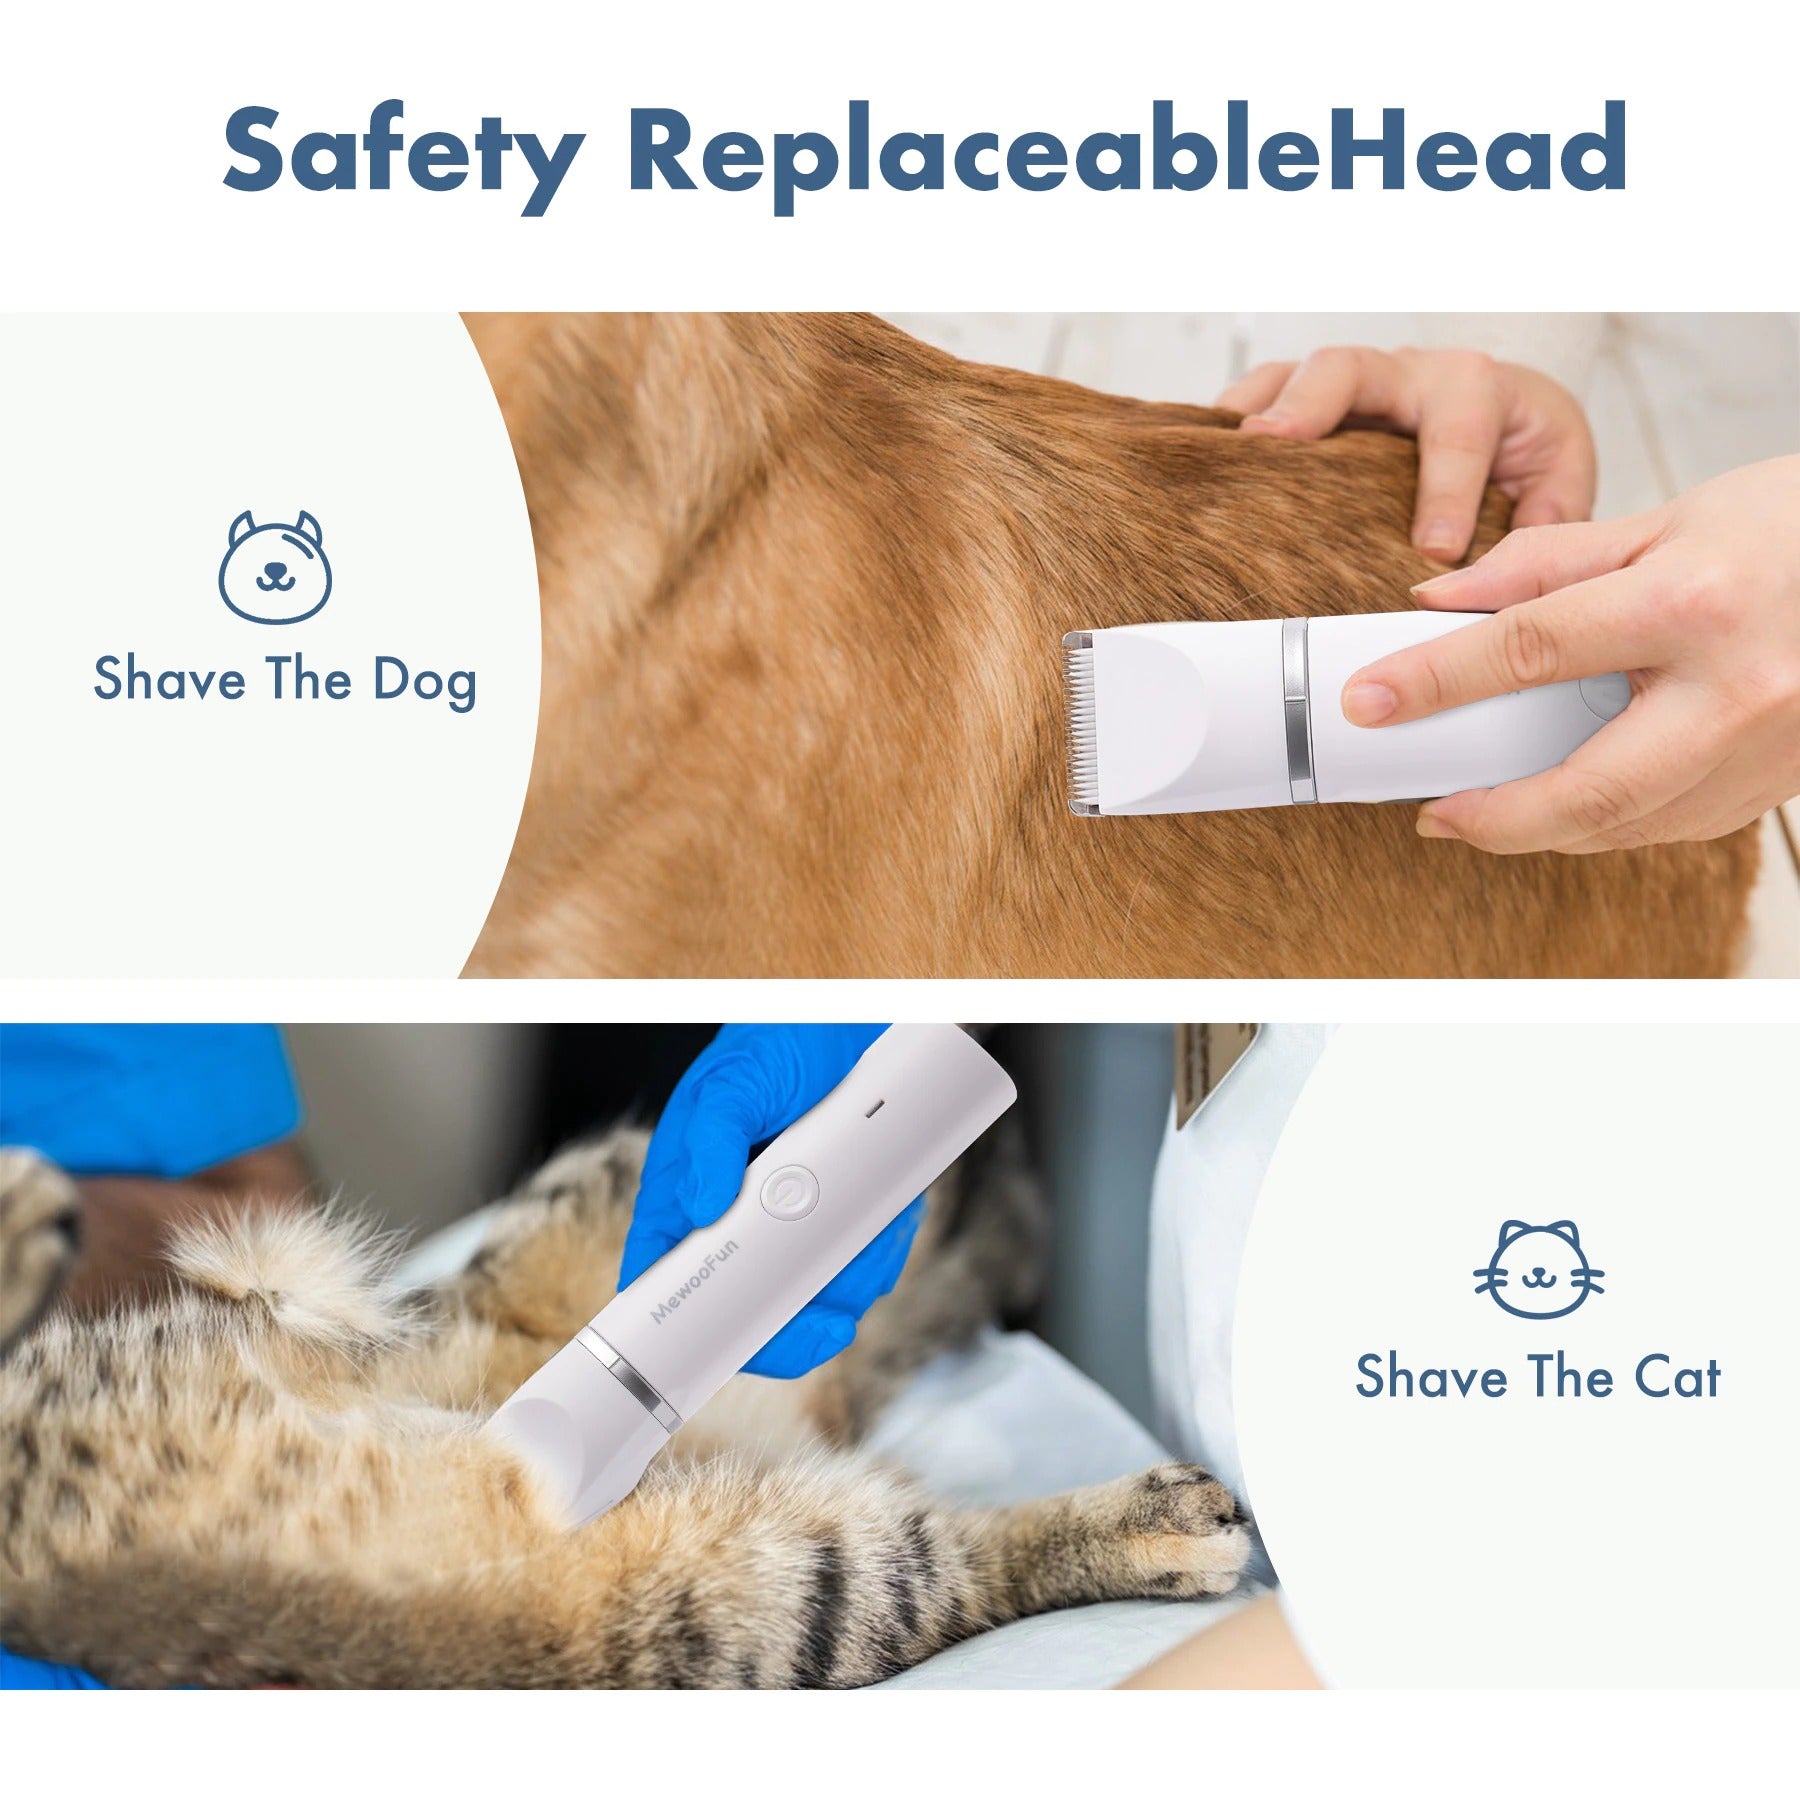 Dog Nail Grinder & Hair Trimmer - safety replaceable head